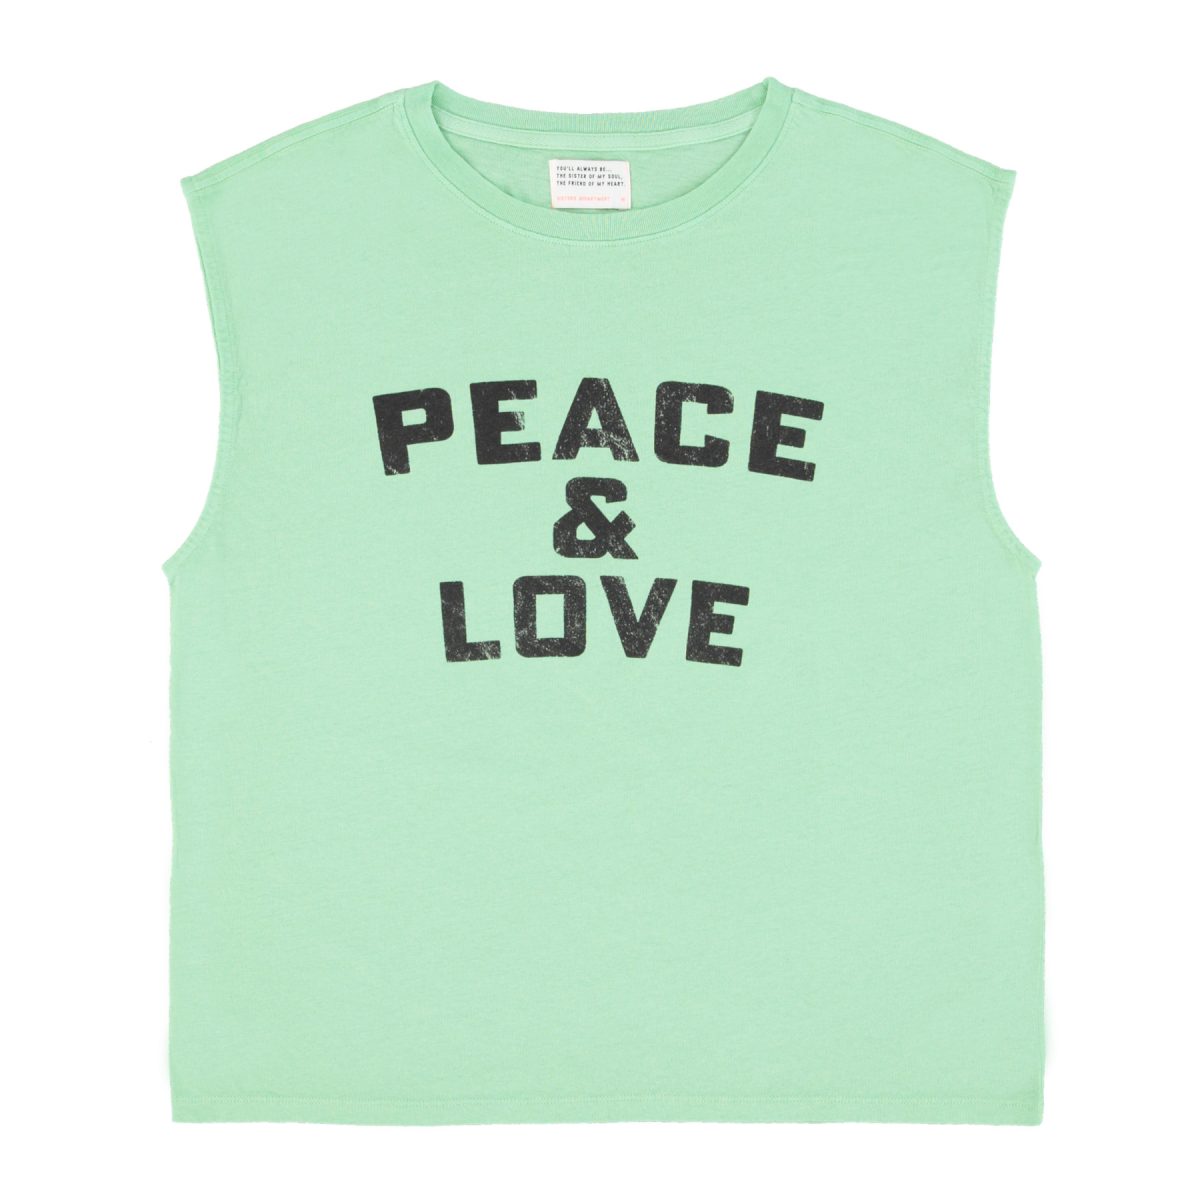 Sleeveless t shirt w round neck green w peace love print sisters department a